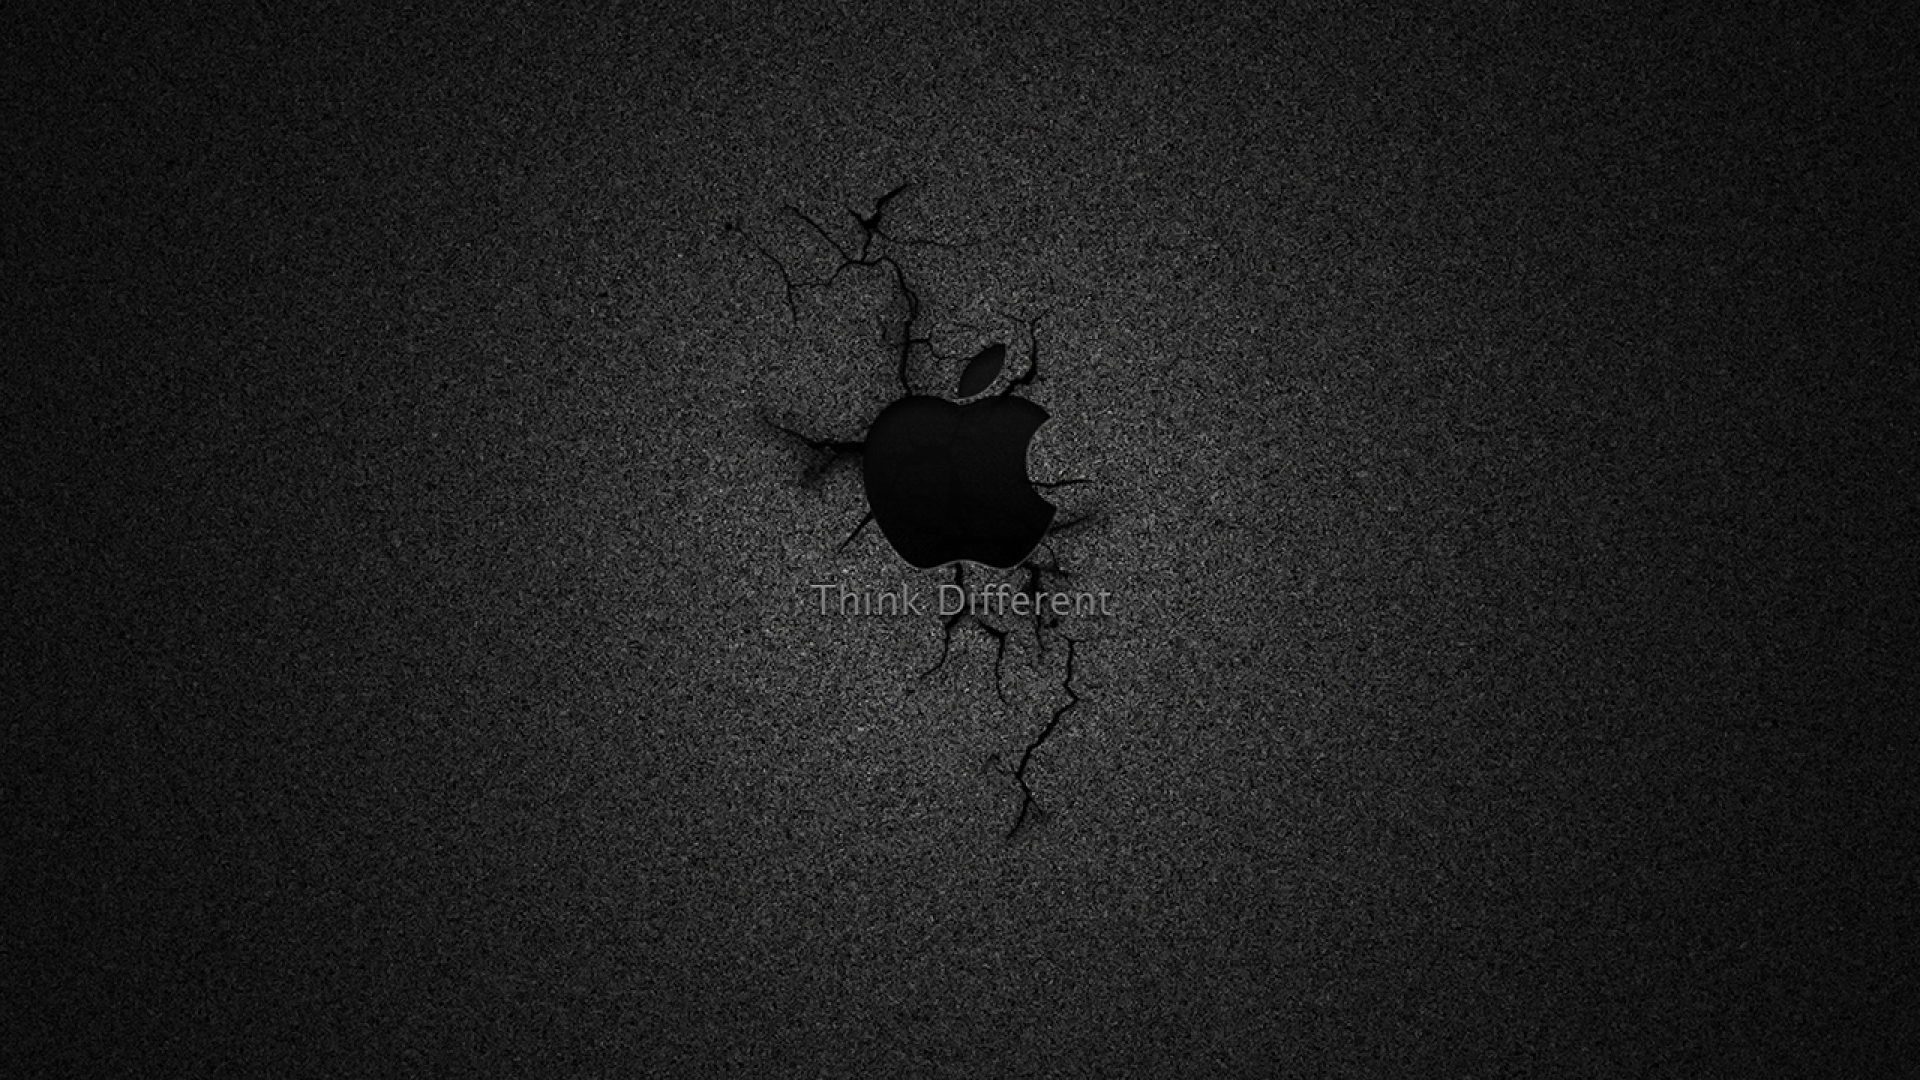 1920x1080 Think Different Apple Wallpaper High Definition, High Resolution HD Wallpapers : High Definition, High Resolution HD Wallpapers